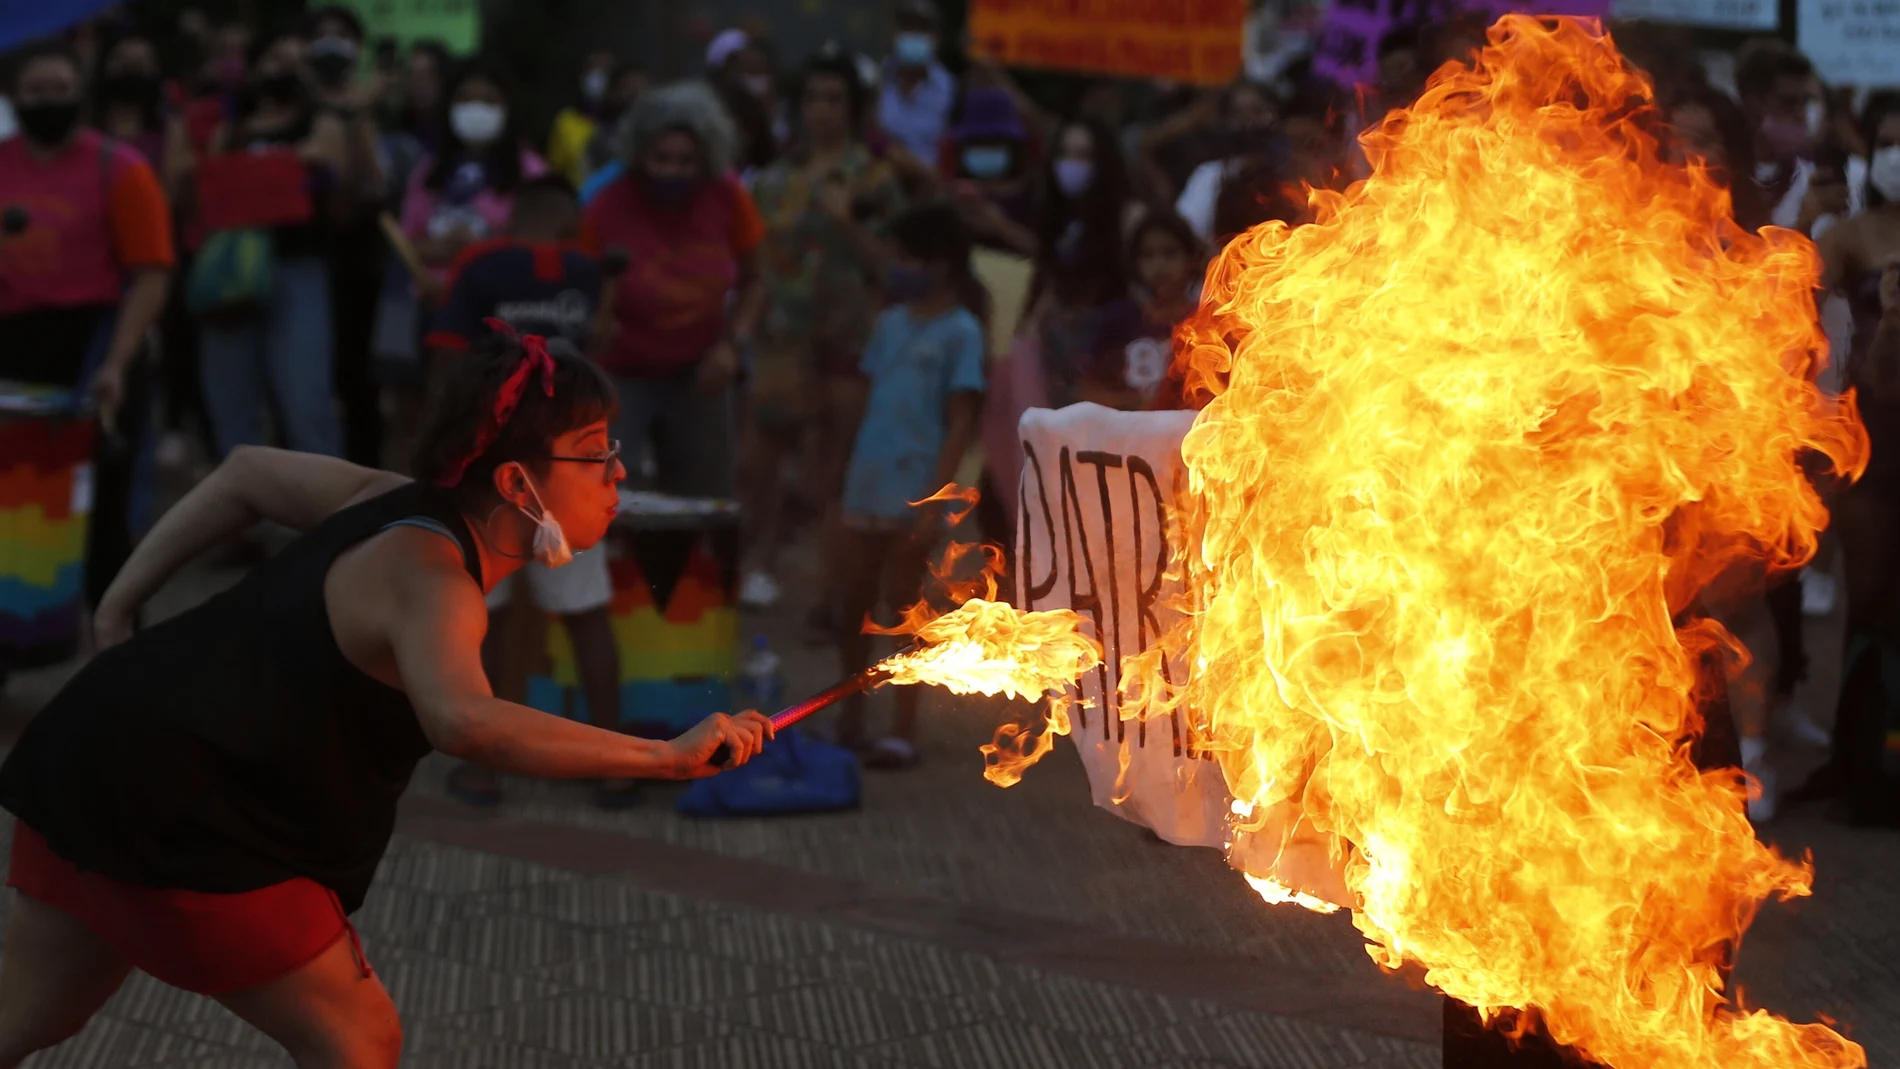 A fire breather burns a poster with the word "Patriarchy" during a march commemorating Women's International Day in Asuncion, Paraguay, Monday, March 8, 2021. (AP Photo/Jorge Saenz)